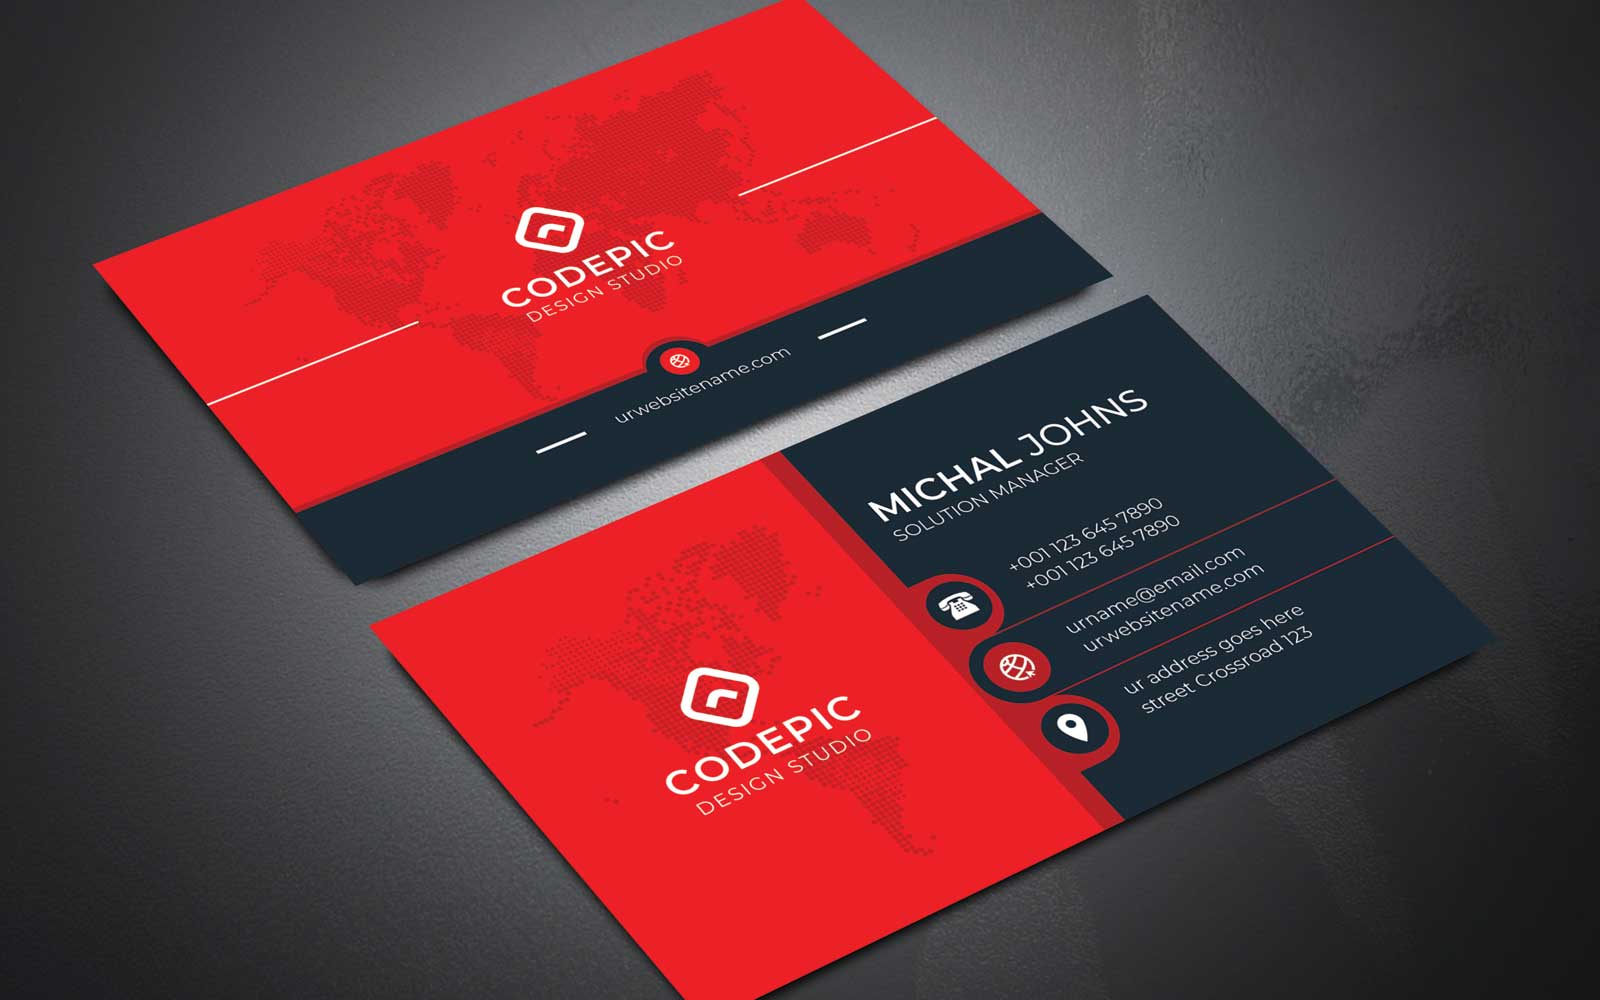 Corporate Business Card Codepic v8